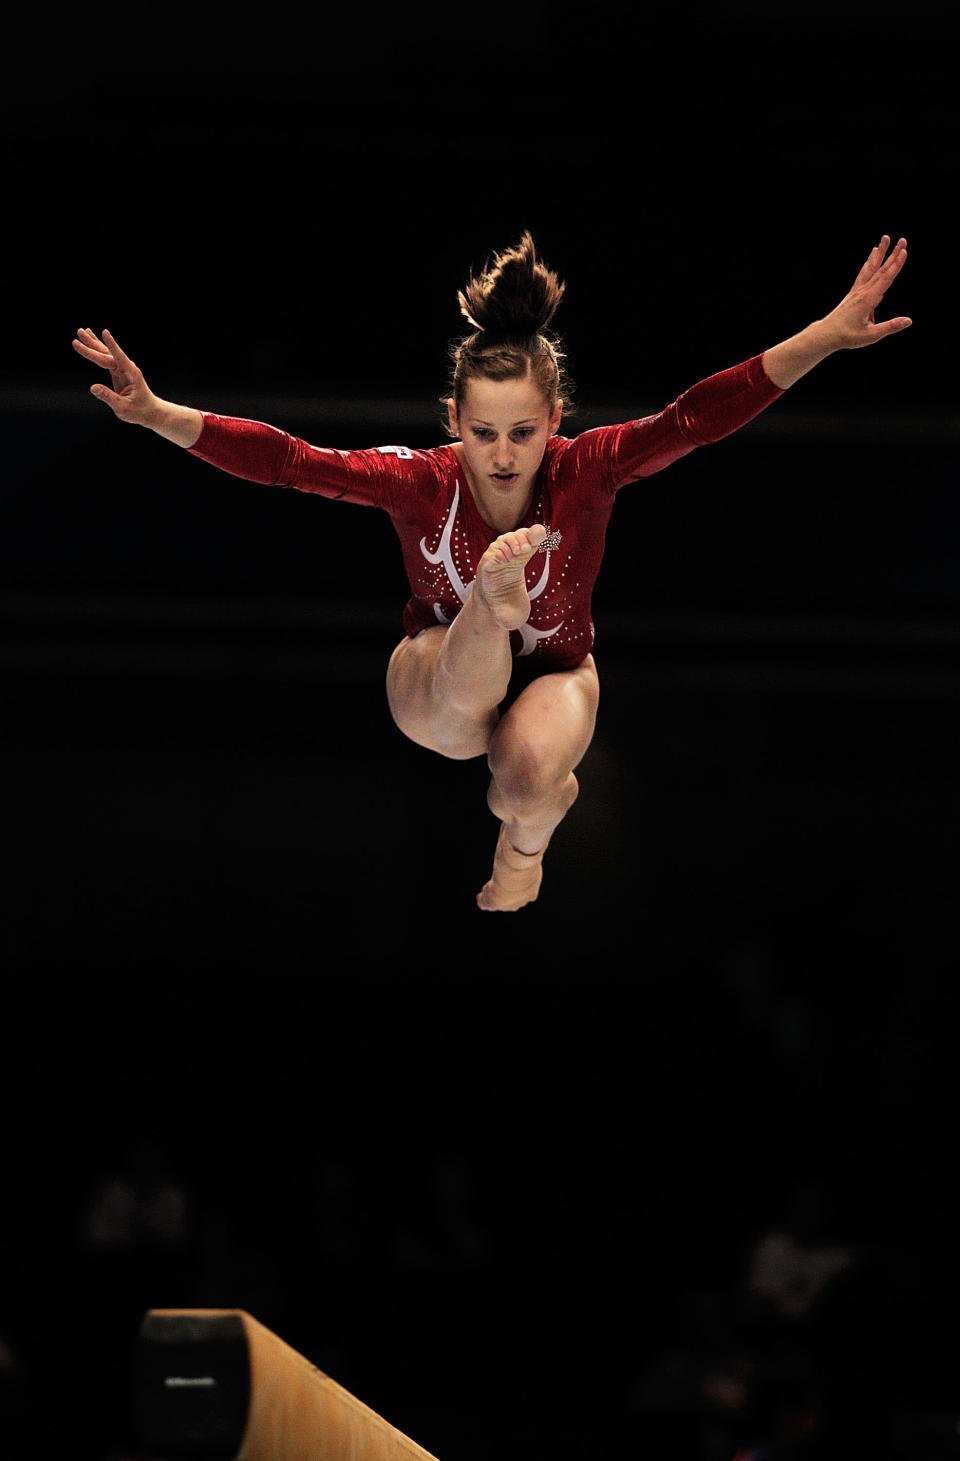 Canada's 17-year-old Dominique Pegg performs on the Beam aparatus in the Women's Qualification during the day one of the Artistic Gymnastics World Championships Tokyo 2011 at Tokyo Metropolitan Gymnasium on October 7, 2011 in Tokyo, Japan. (Adam Pretty/Getty Images)